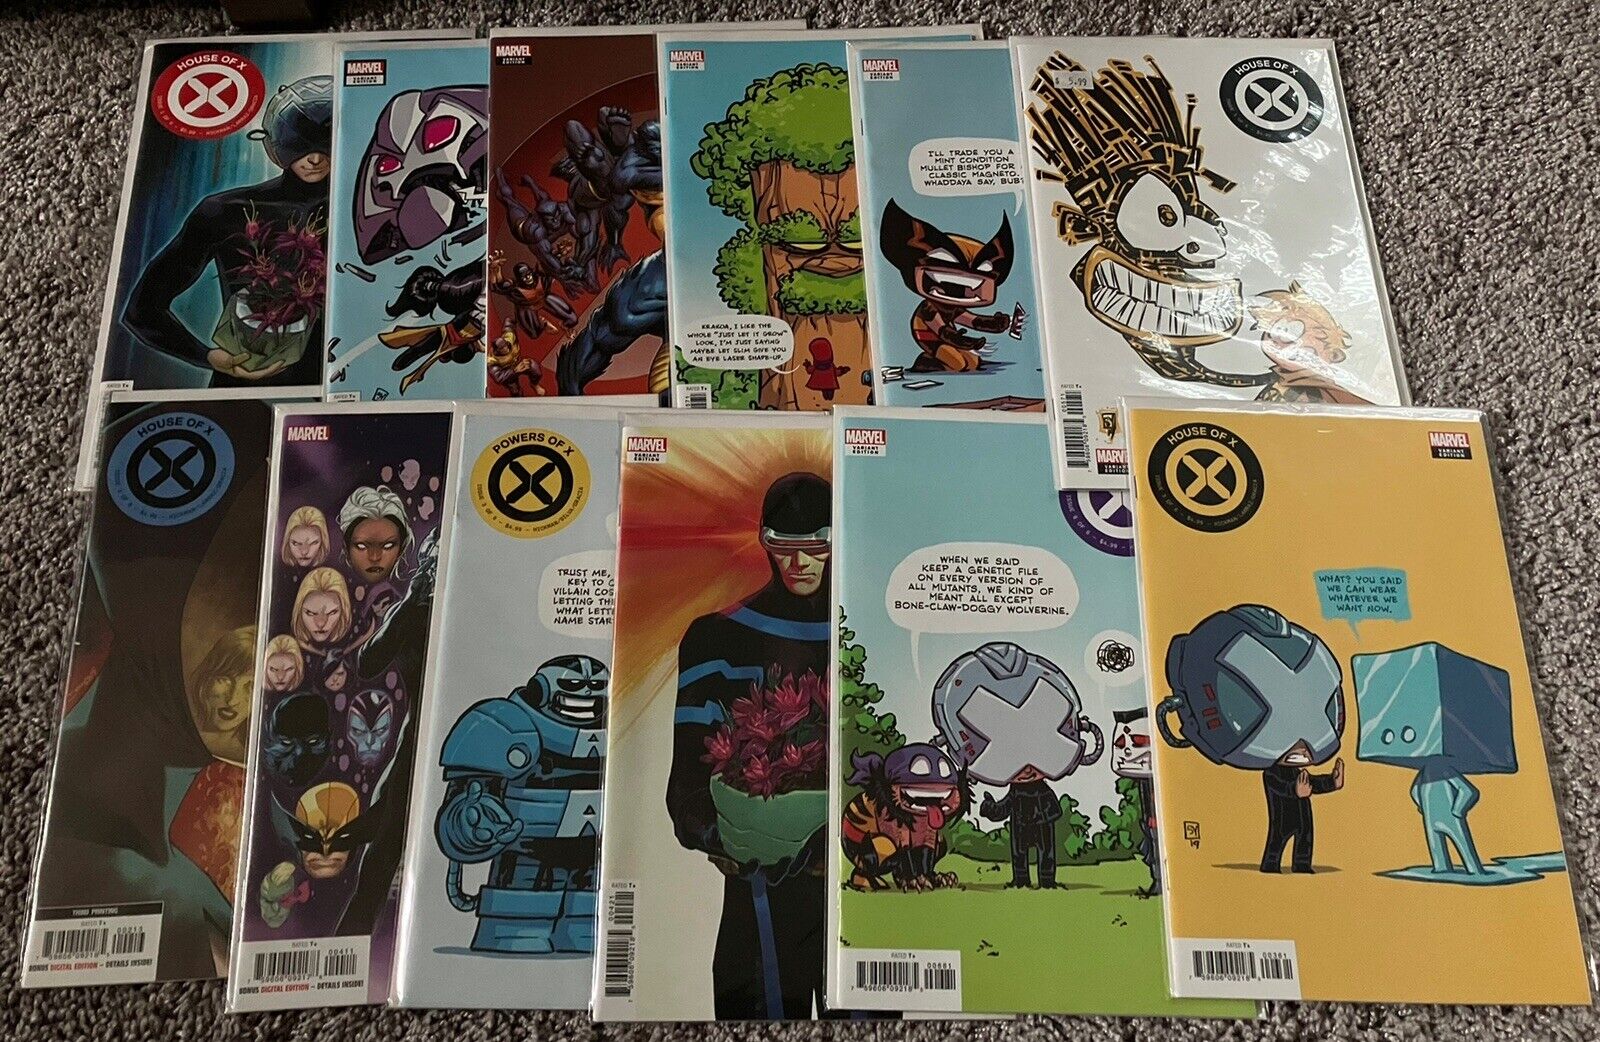 House & Powers of X #1-6 12 Comic FULL RUN Skottie Young Variants All NM